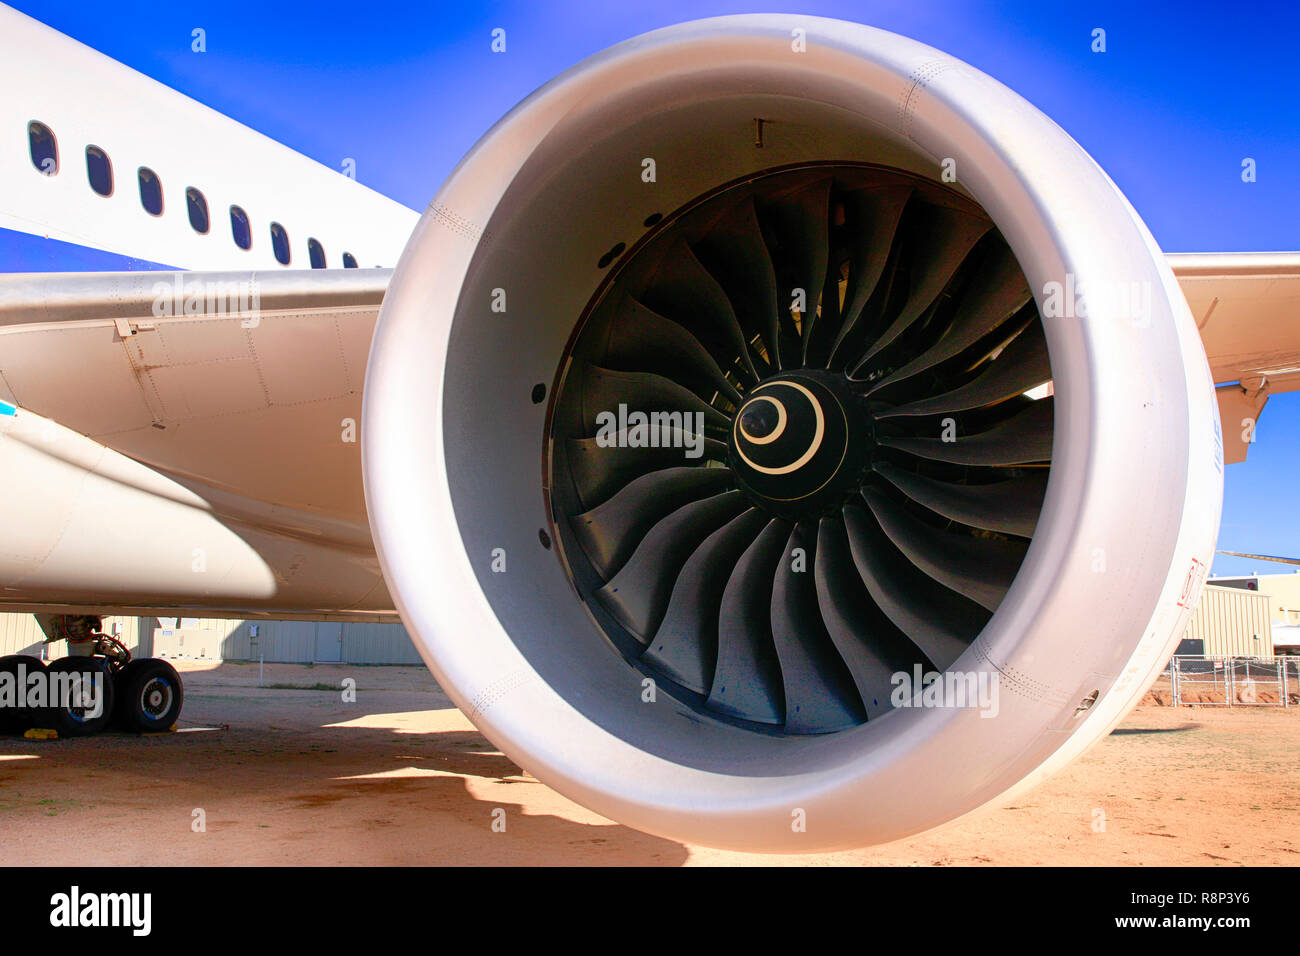 2009 Boeing 767 Dreamliner Rolls Royce Trent 600 jet engine on display at the Pima Air & Space Museum in Tucson, AZ Stock Photo